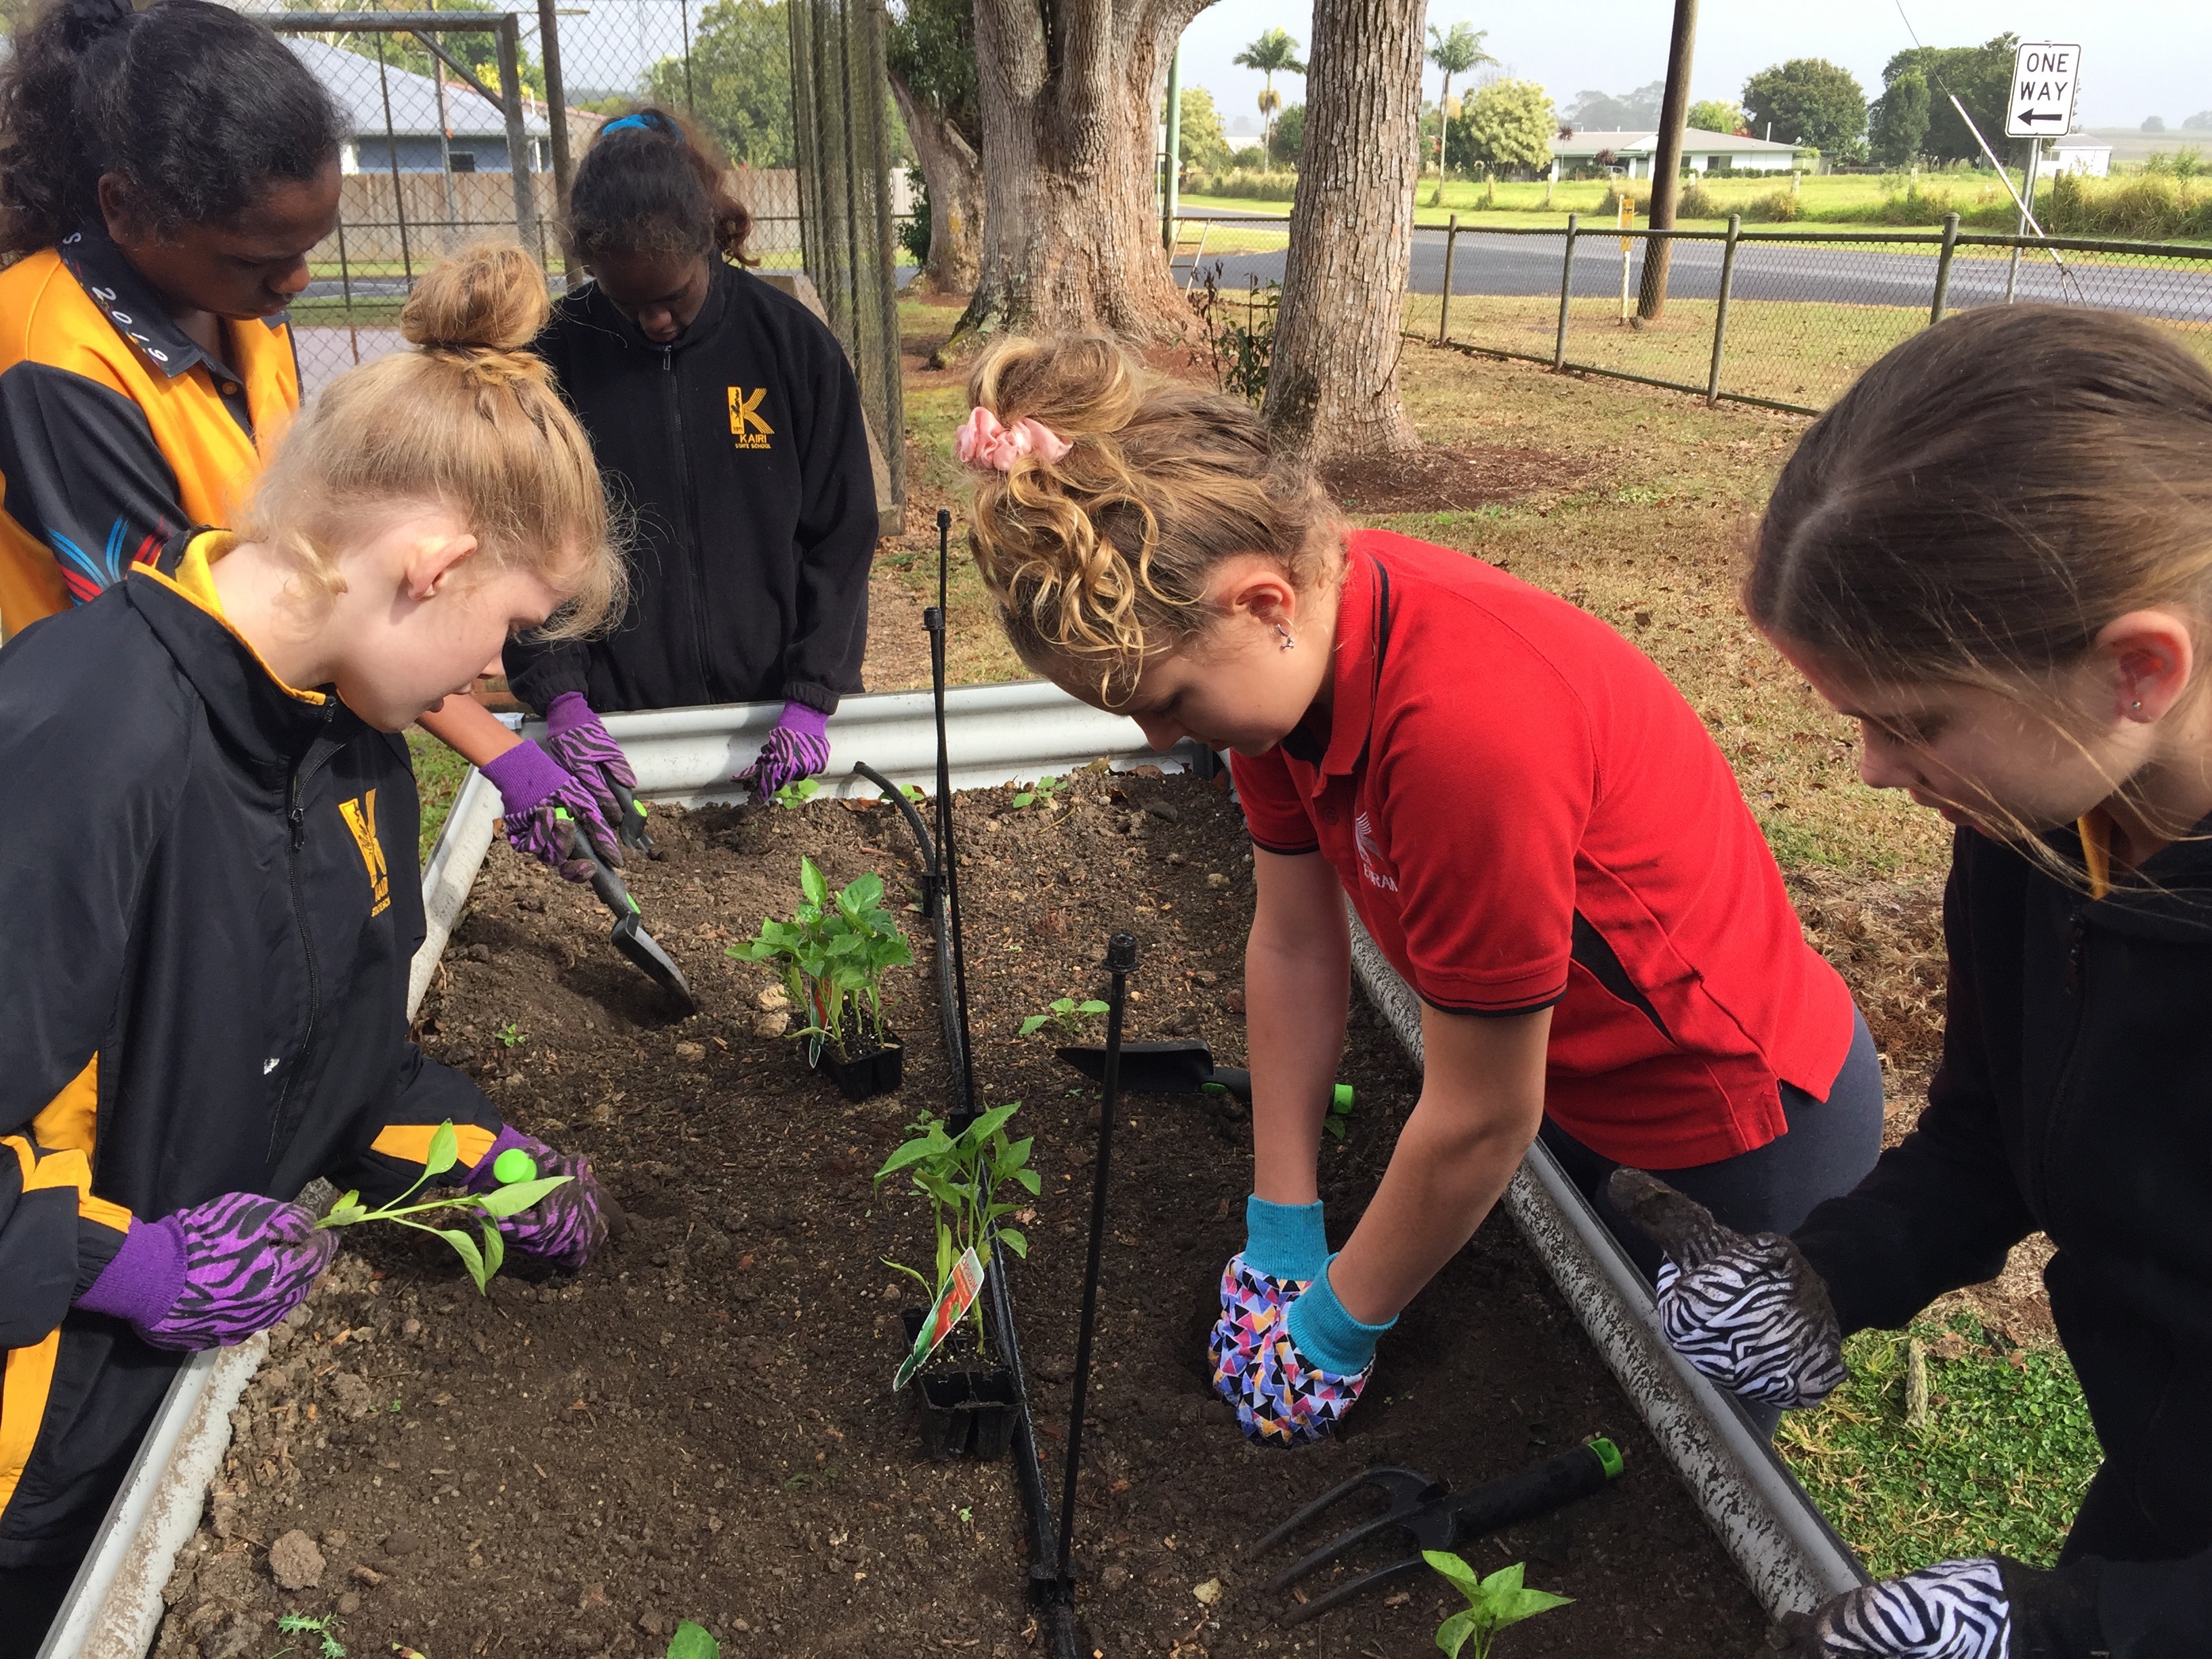 Kairi State School Sustainable Garden Project students and instructor at work